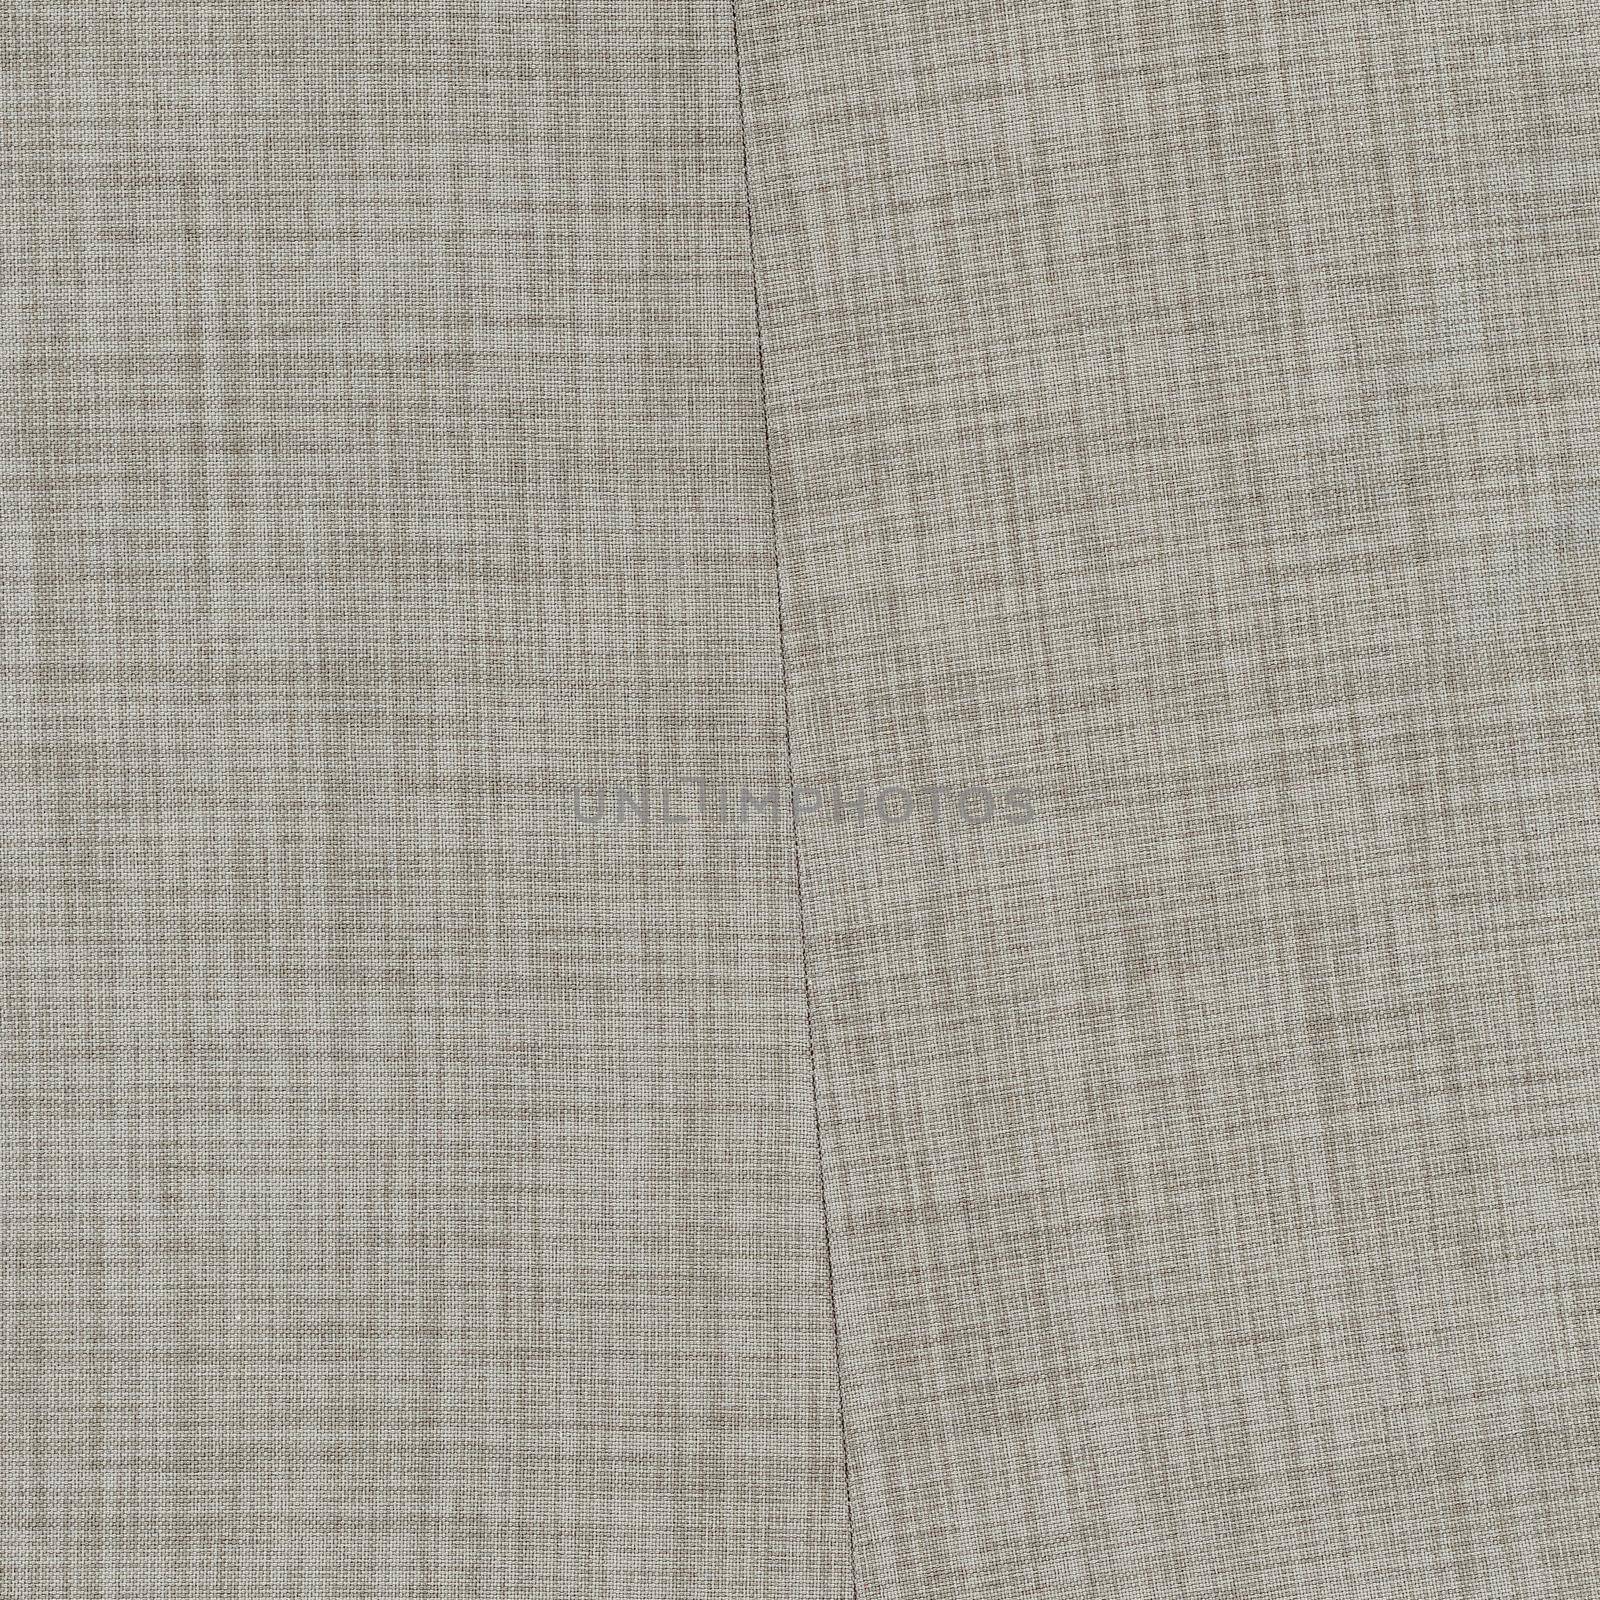 light grey polyester and cotton fabric texture useful as a background